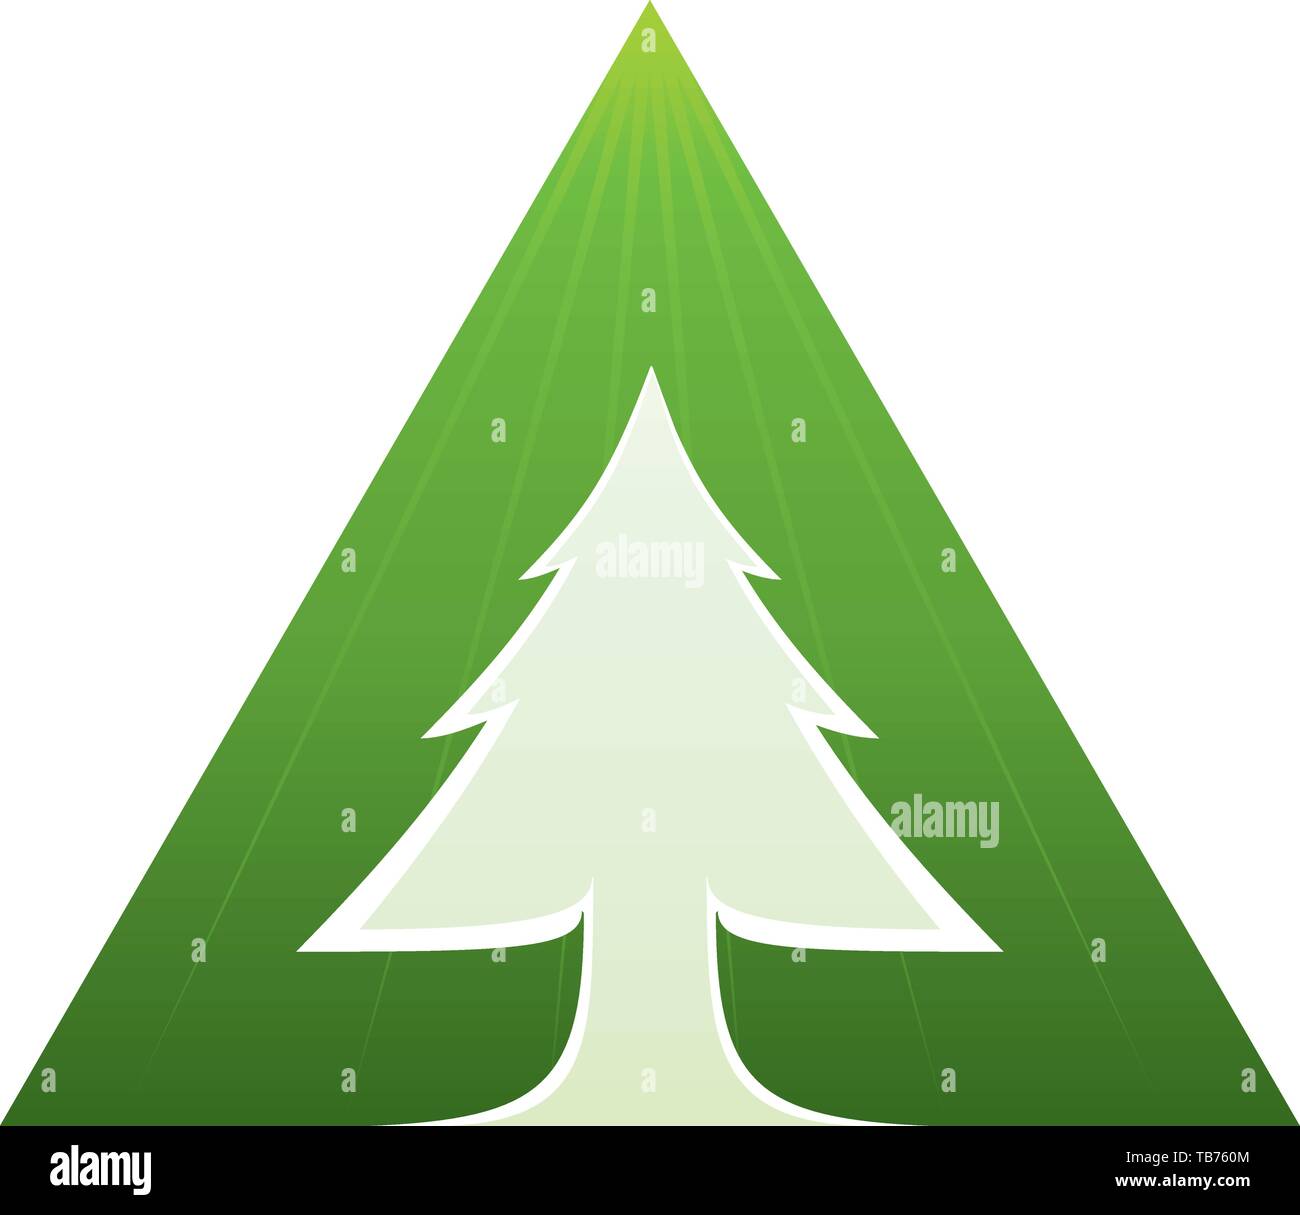 Vector illustration. Recycle symbol. A tree inside a green triangle. Stock Vector